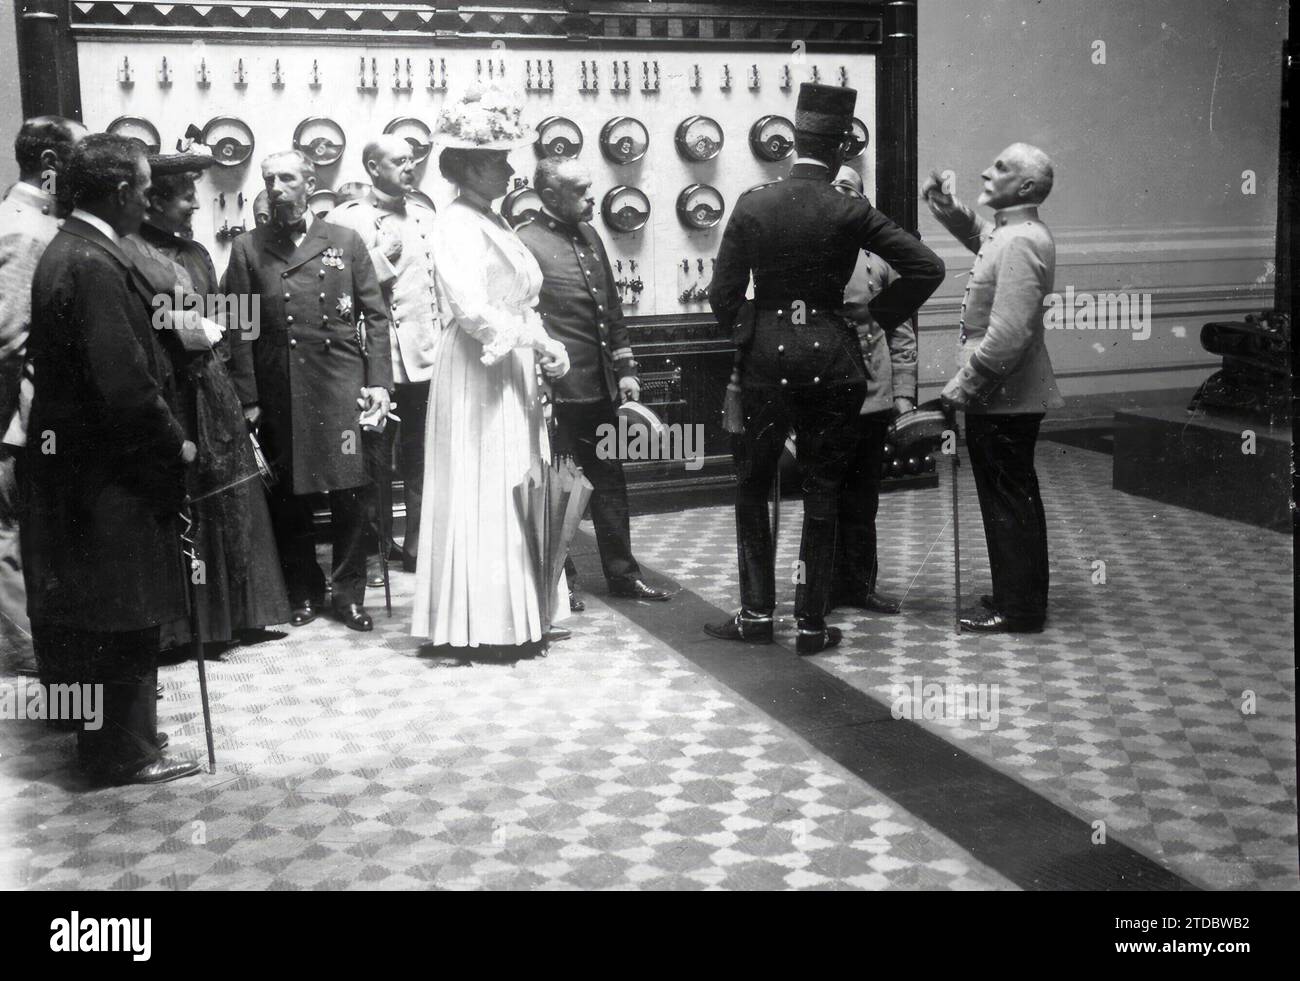 06/30/1906. Ss.Mm. Visiting the electricity cabinet and listening to the explanations of the colonel director of the artillery academy. Credit: Album / Archivo ABC / Julio Duque,Francisco Goñi Stock Photo